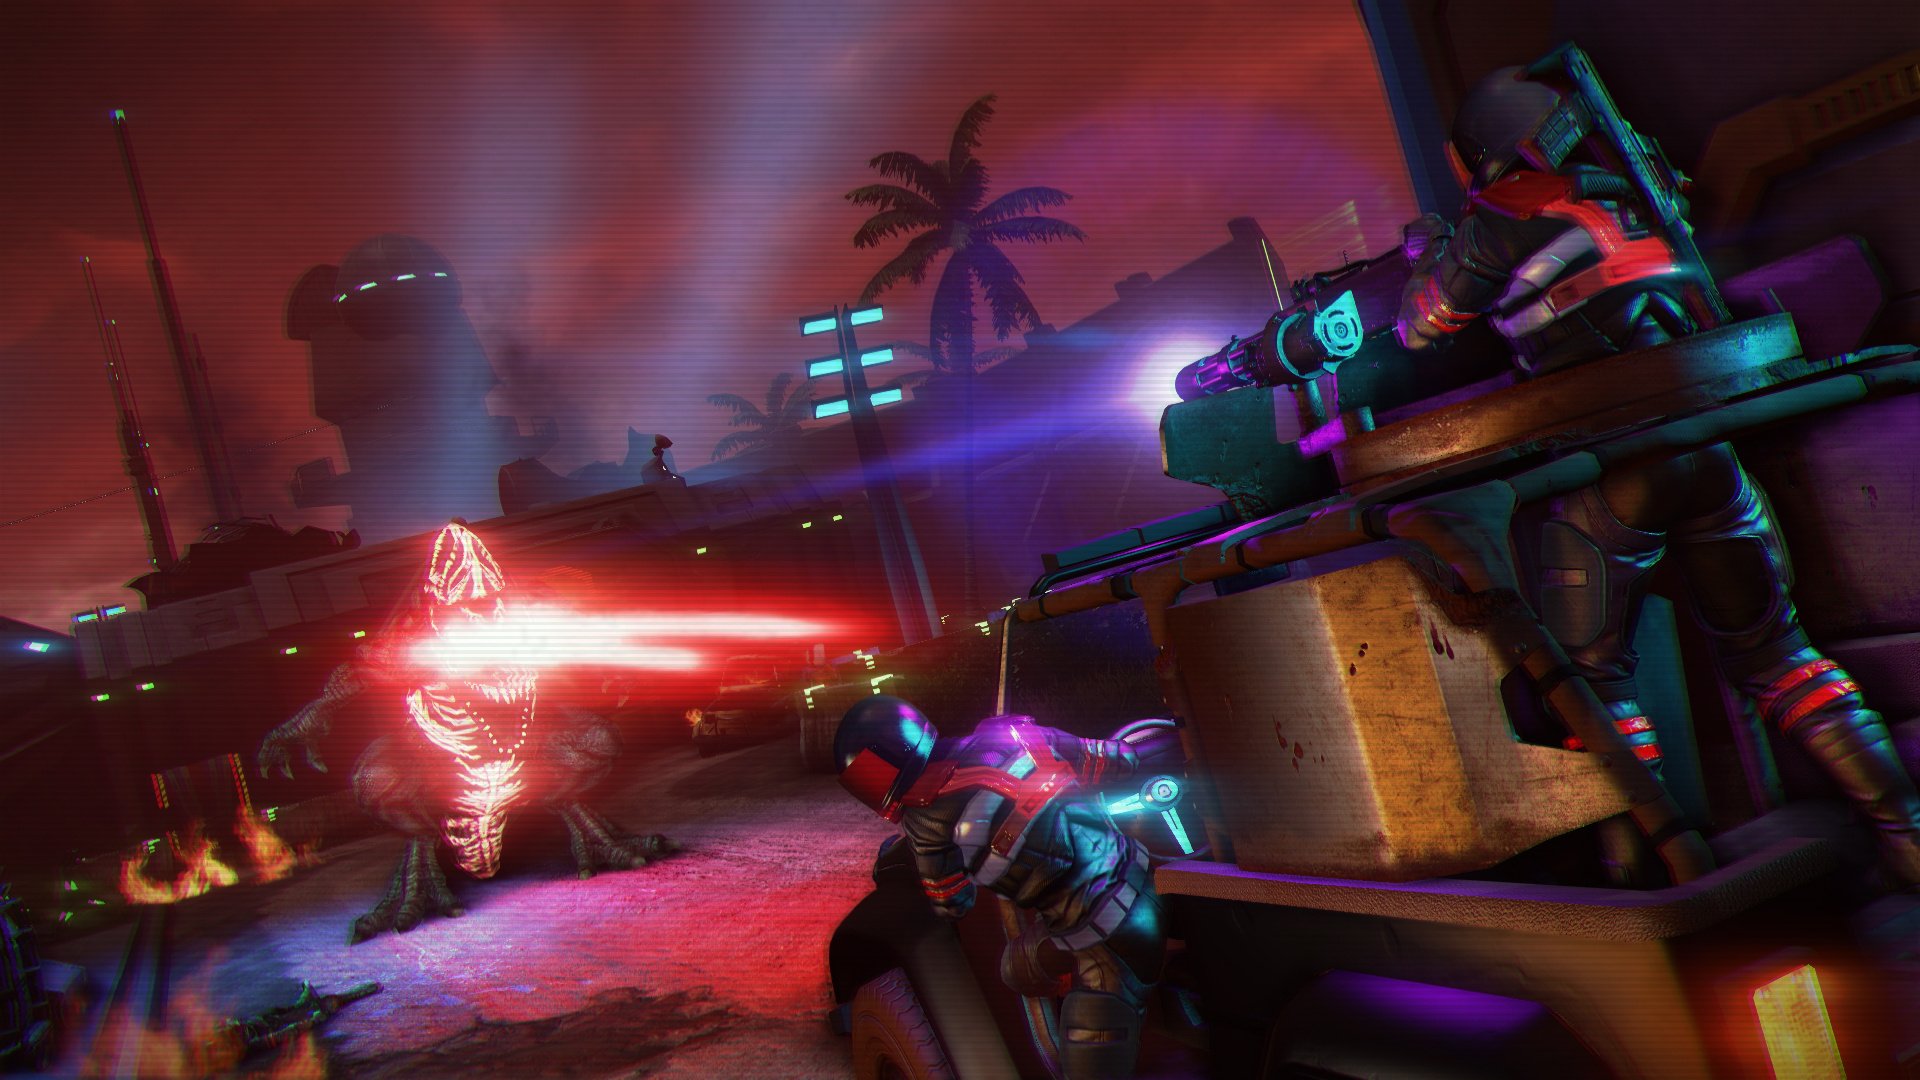 Far Cry 3: Blood Dragon (PS3 / PlayStation 3) Game Profile | News